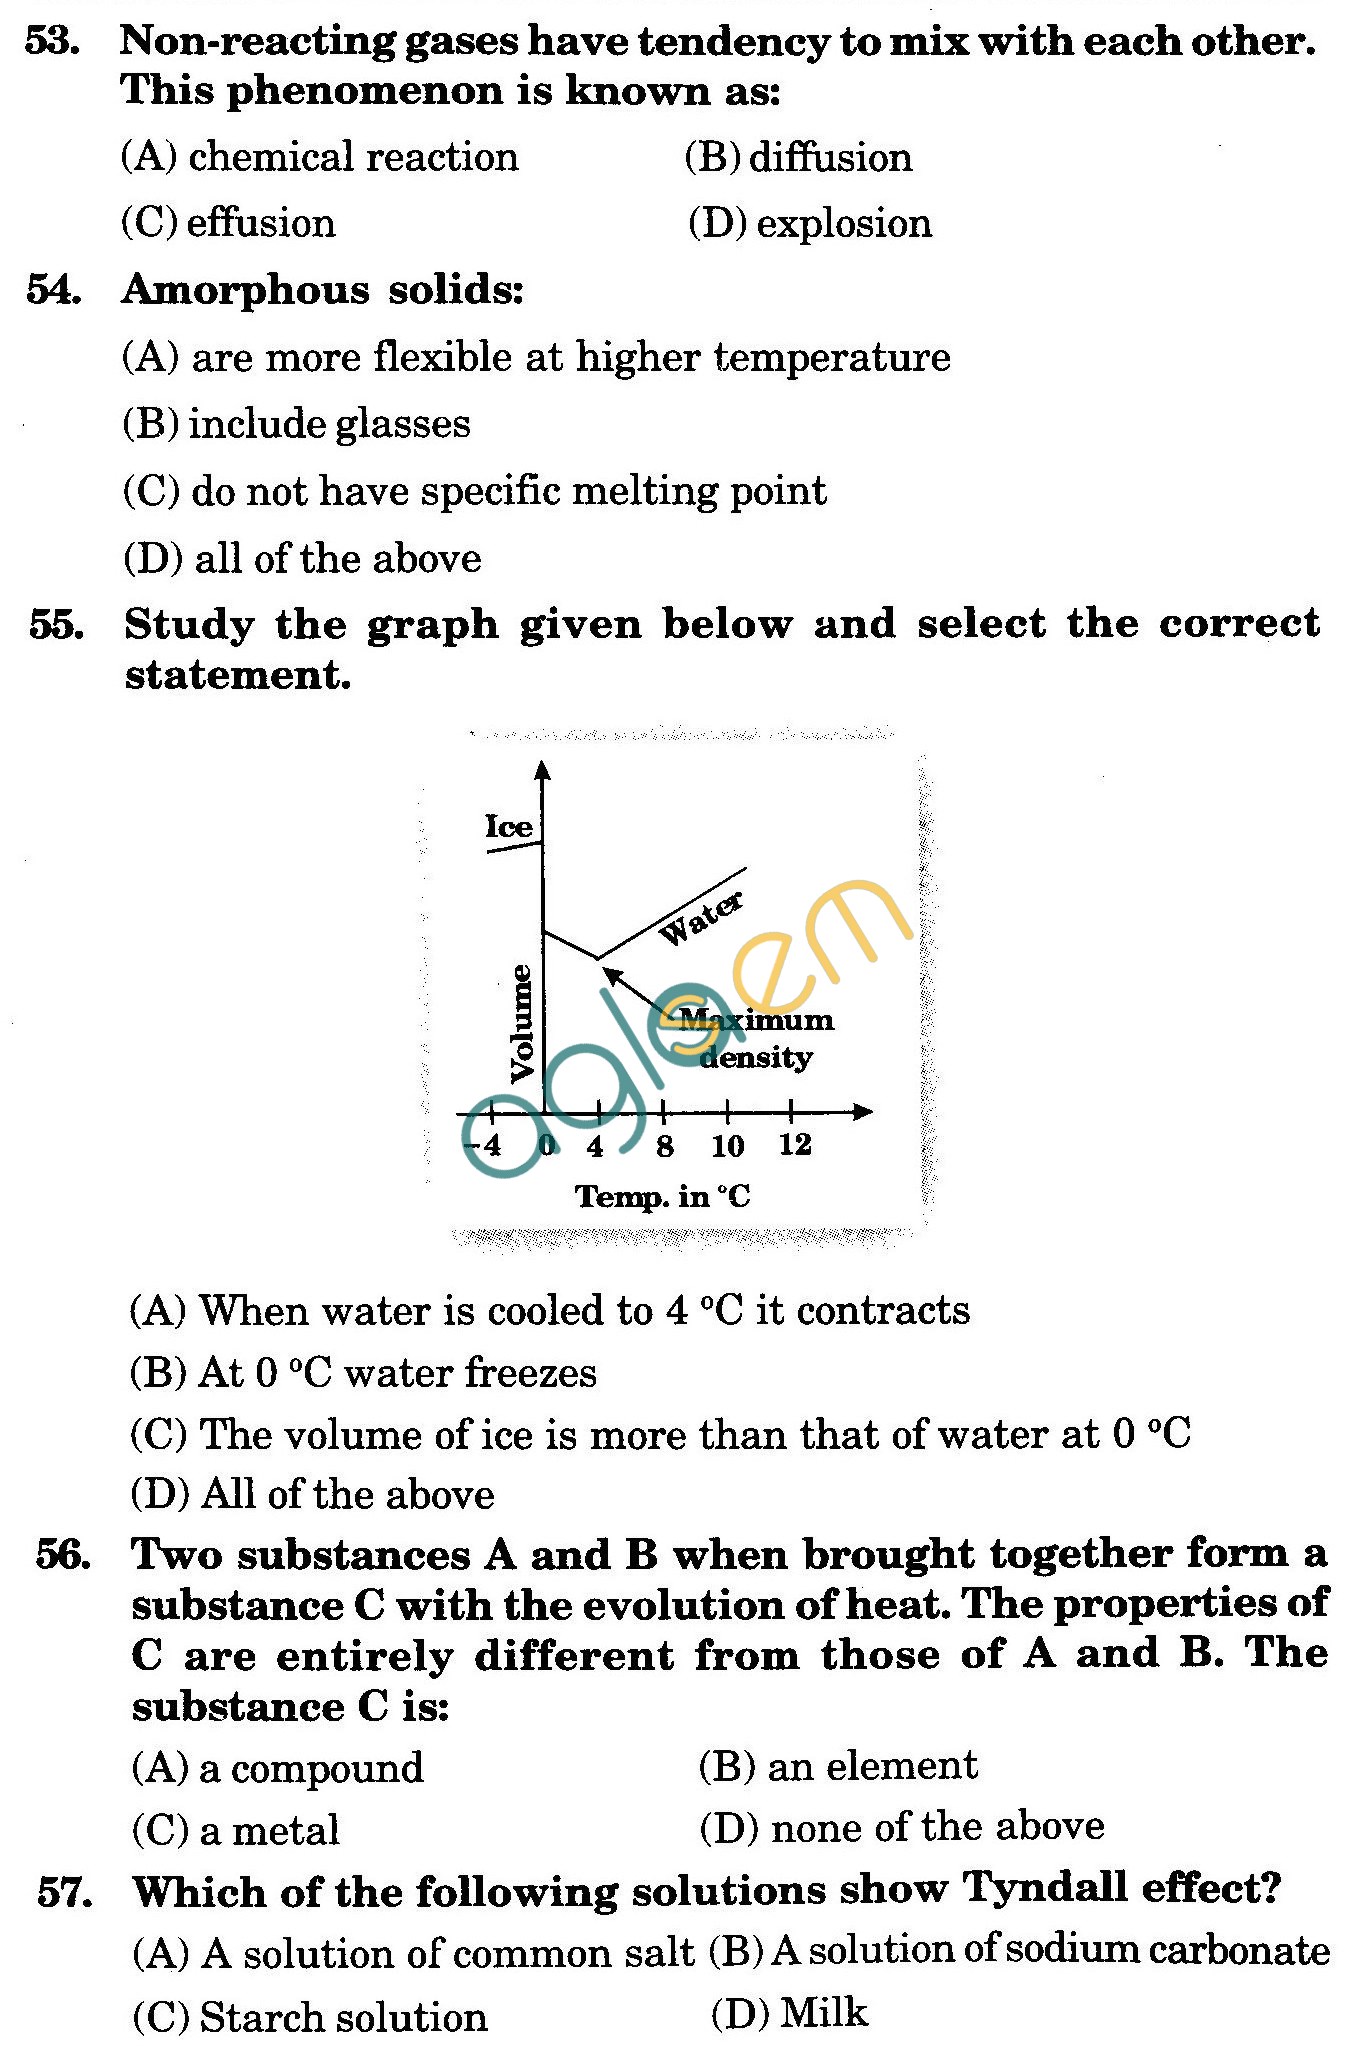 NSTSE 2009 Class IX Question Paper with Answers - Chemistry